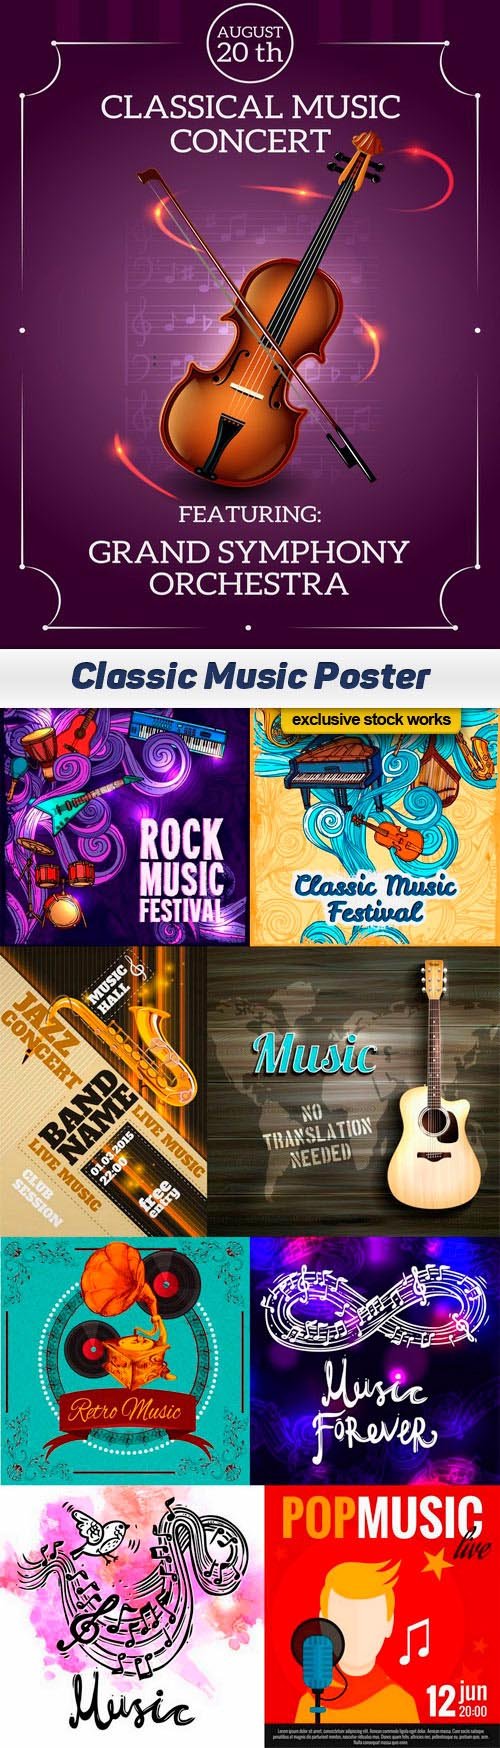 Classic Music Poster - 9 EPS